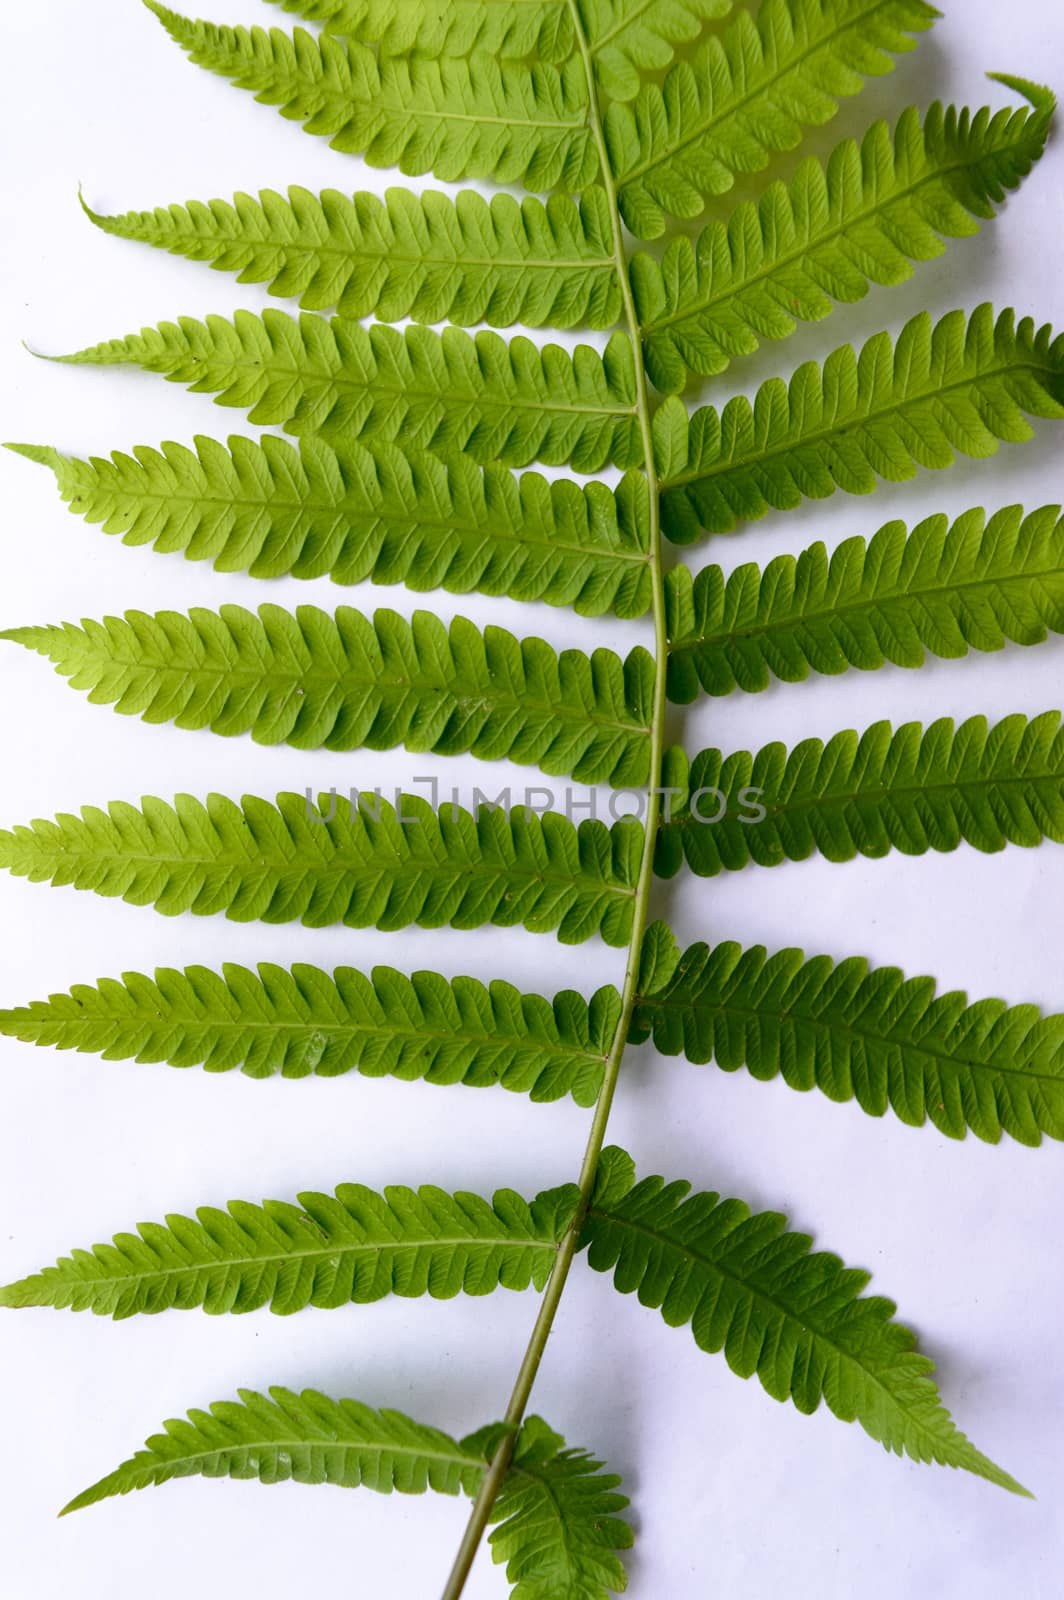 Close up of Compound Pinnate green leaves, leaflets in rows, two at tip. White background. Vertical formation. Abstract vain texture. Bright lit by sunlight. Use as space for text or image backdrop.